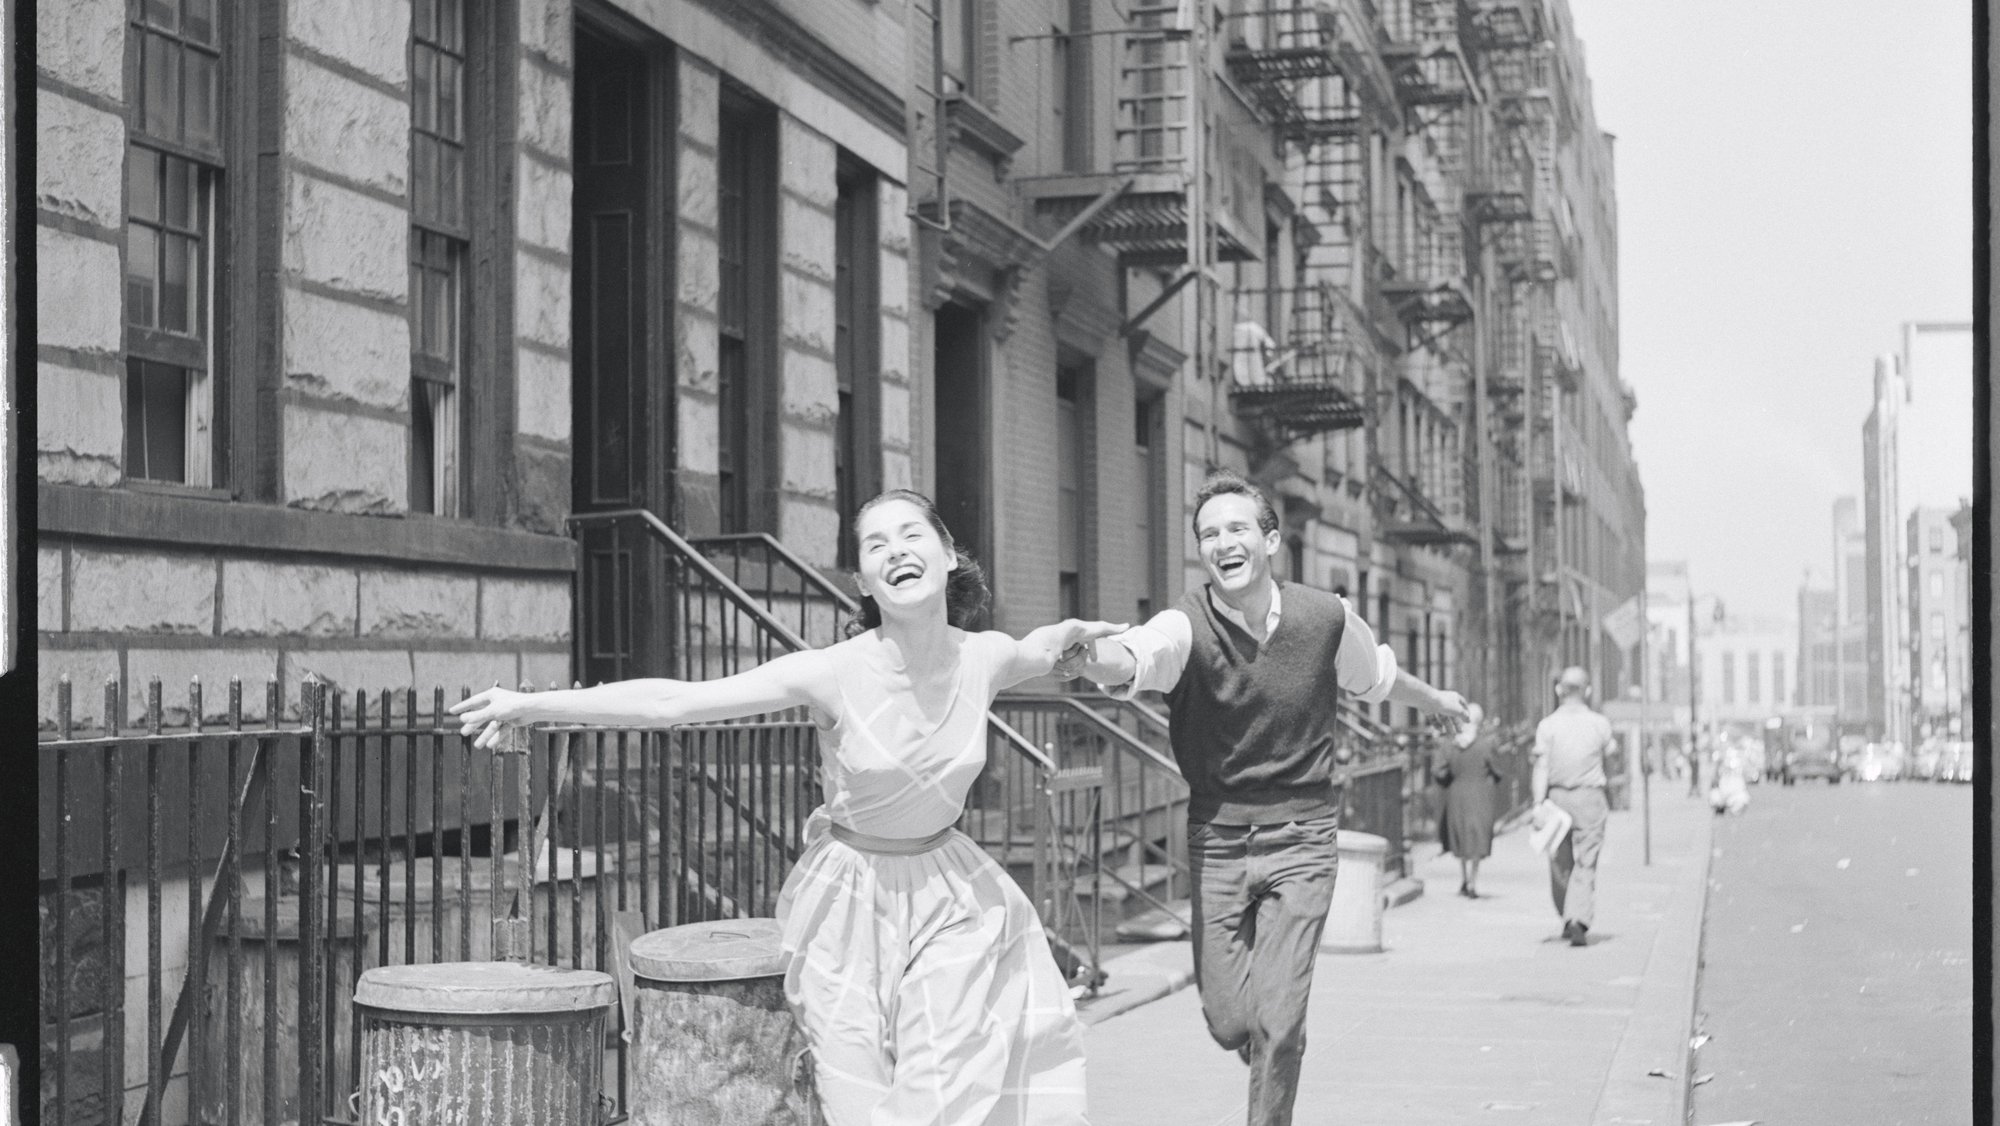 Carol Lawrence and Larry Kert on location (West 56th street between 9th and 10th ave) for West Side Story publicity shoot_NYPL.jpg